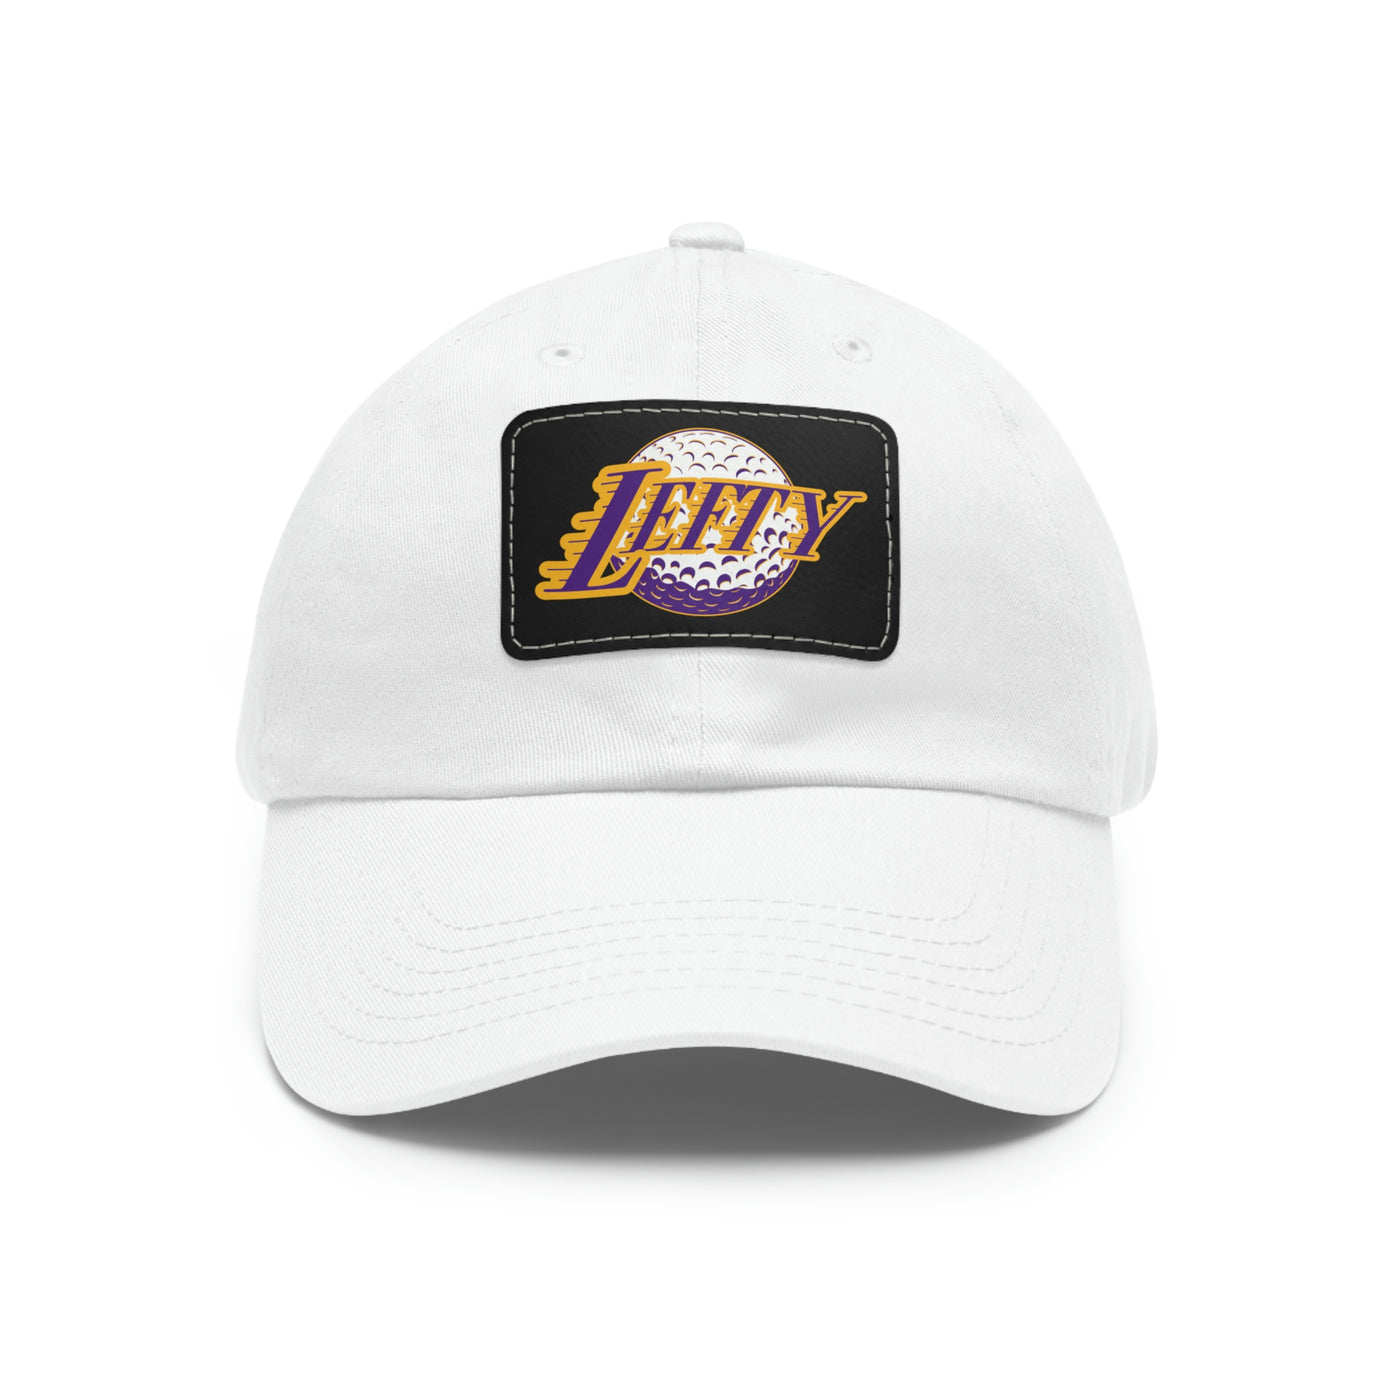 LEFTY Golf Leather Patch Dad Hat (Dylan Jones Edition)